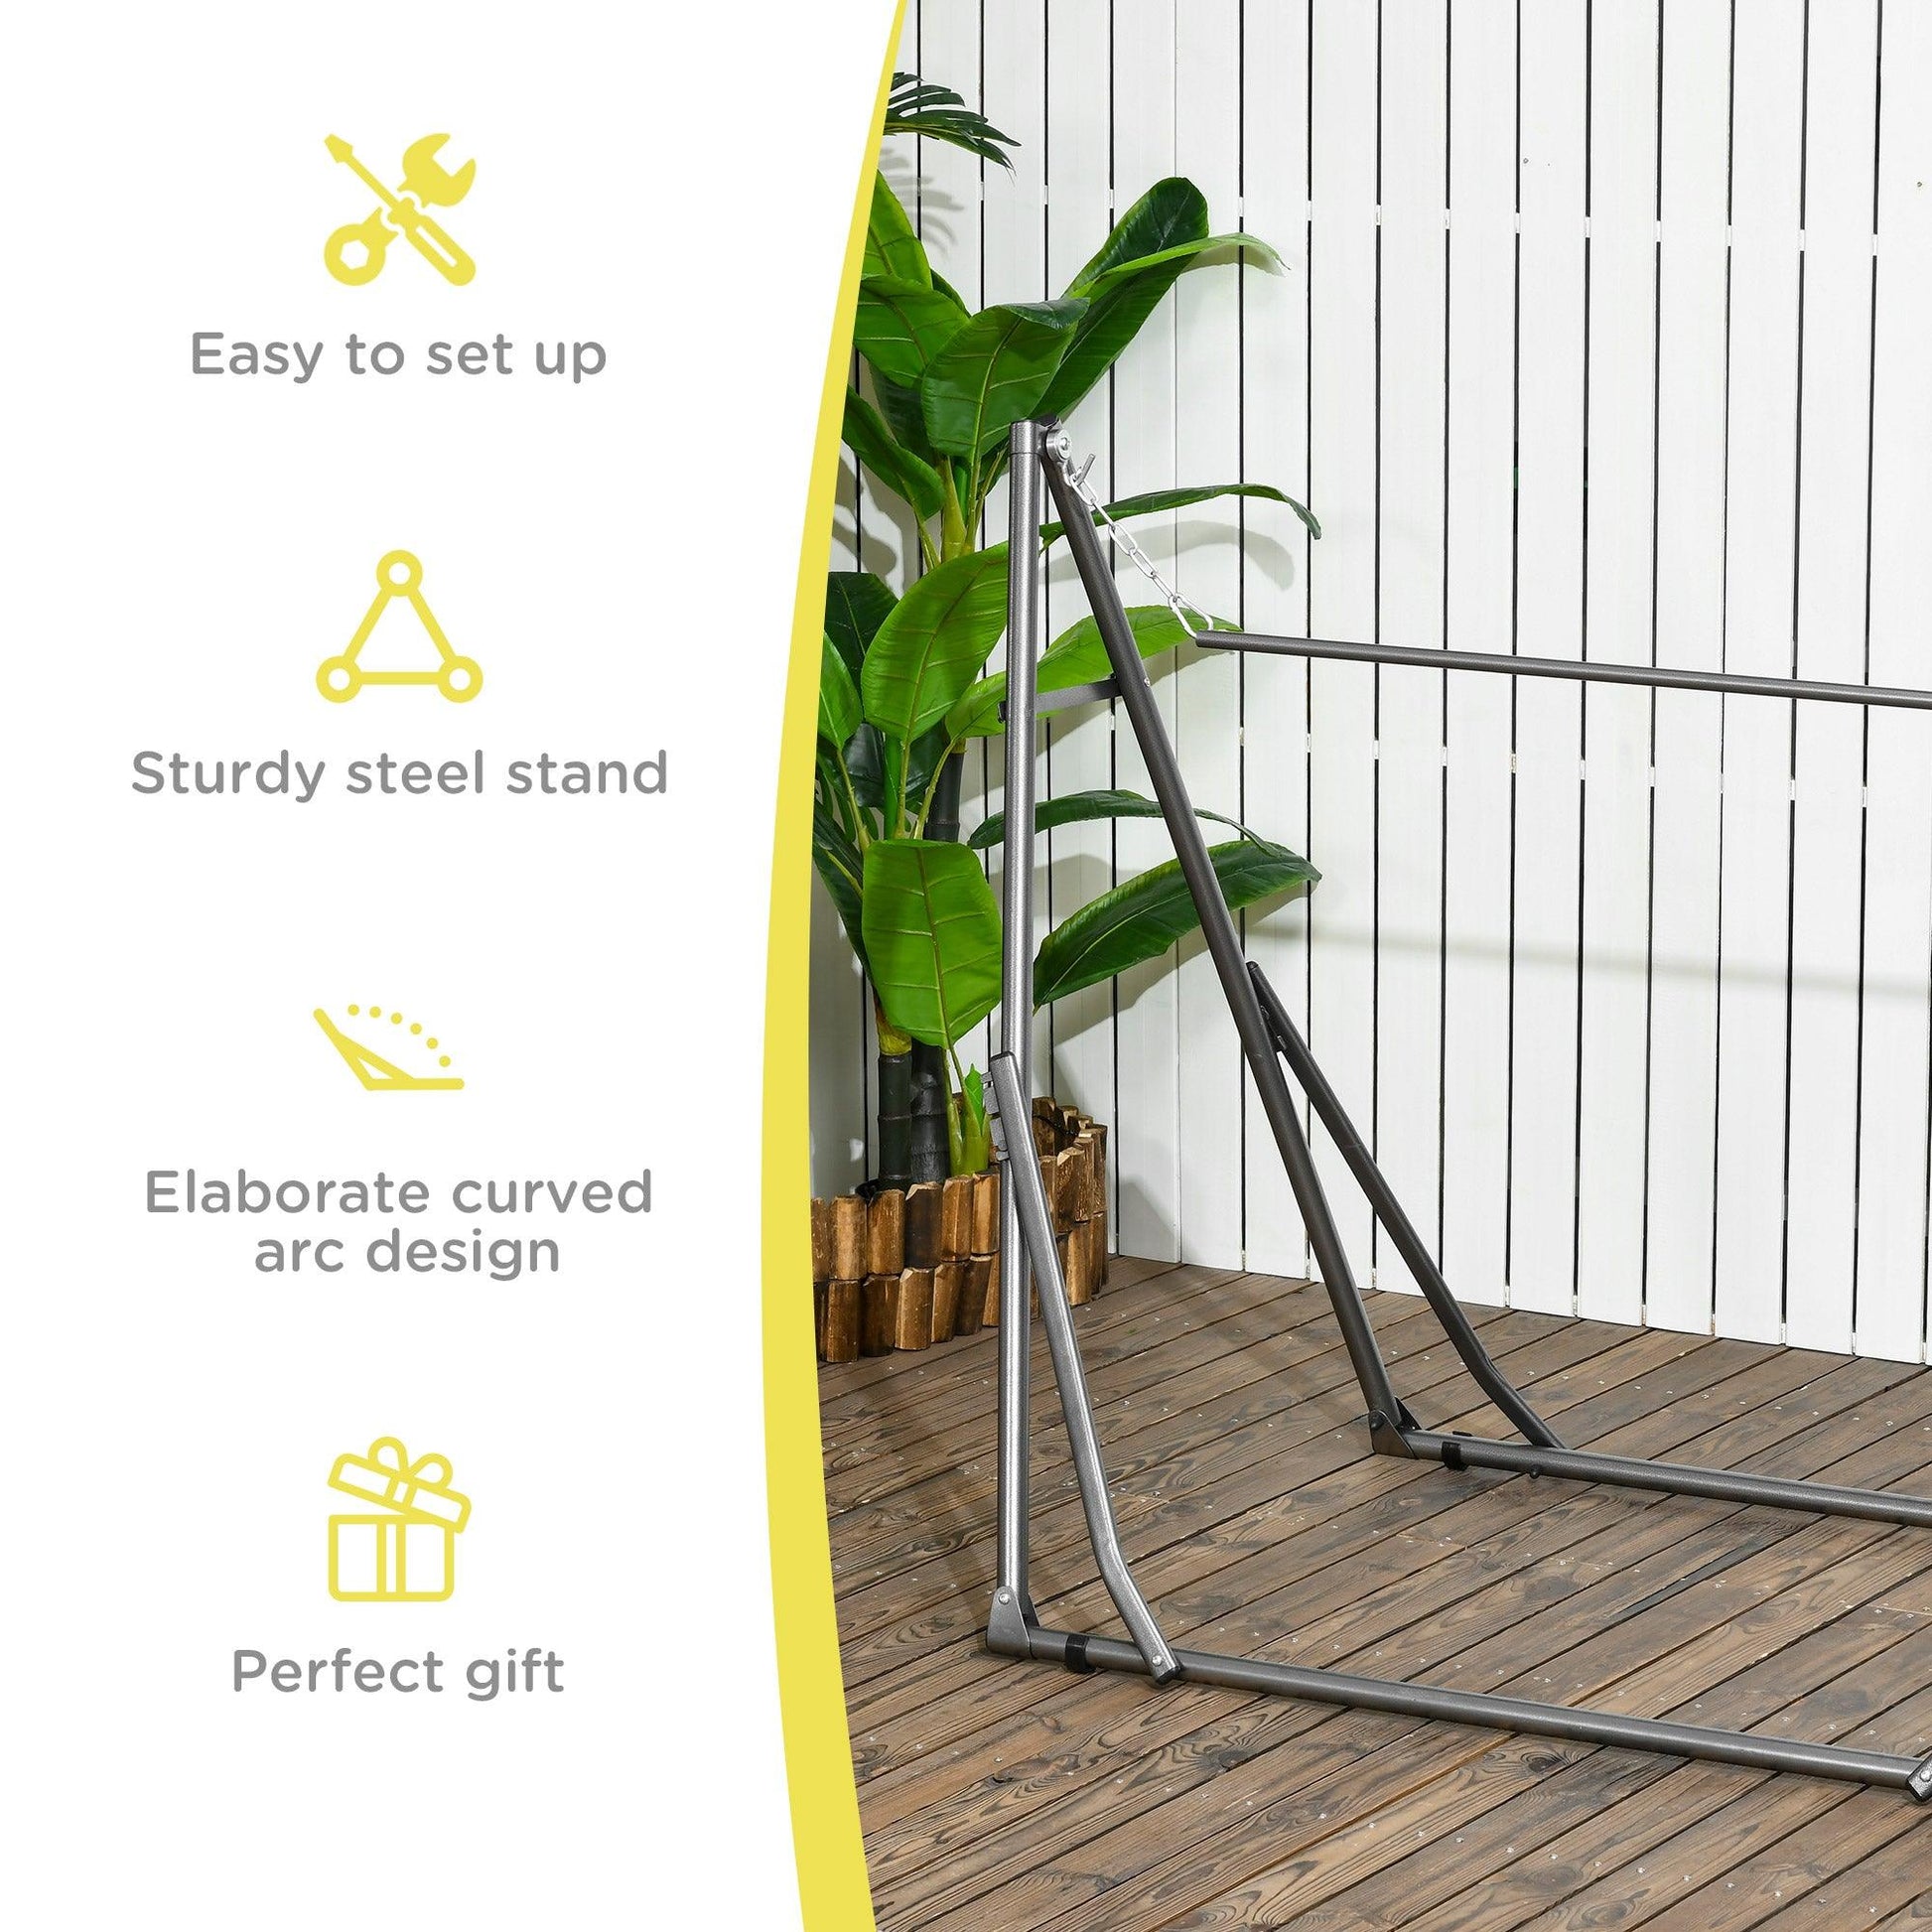 Outsunny Foldable Hammock Stand, 2 in 1 Hammock Net Stand & Clothes Drying Rack - ALL4U RETAILER LTD